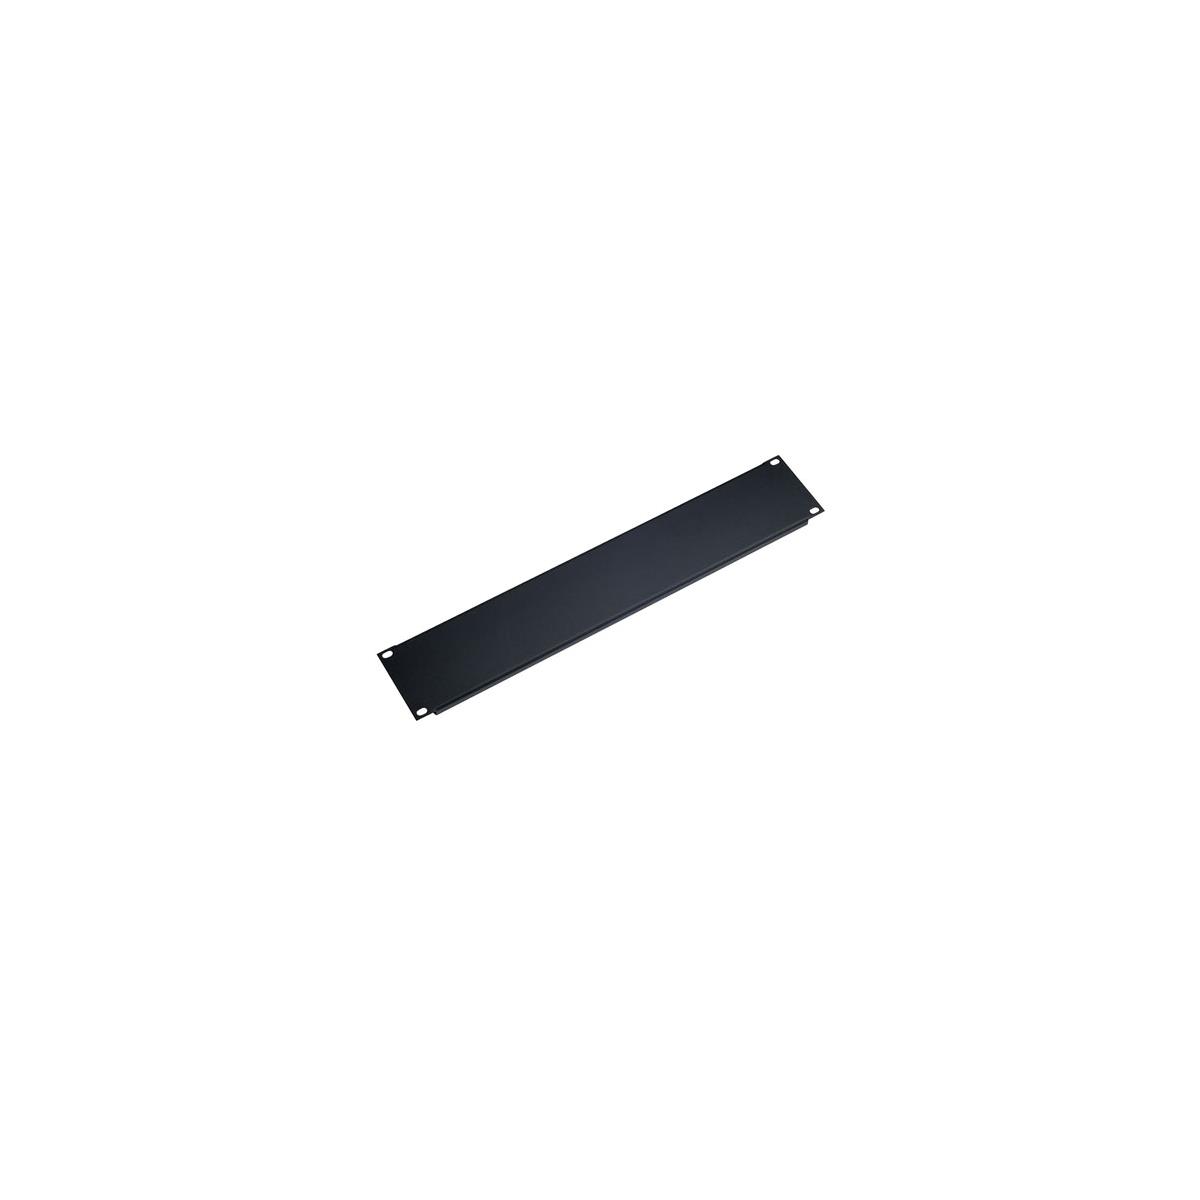 K&M 494/1 Steel Panel for 19" Equipment Racks, 3-Spaces Height, Black This 3 unit 0.06" flanged style, steel panel is designed for a K&M 19" equipment rack.